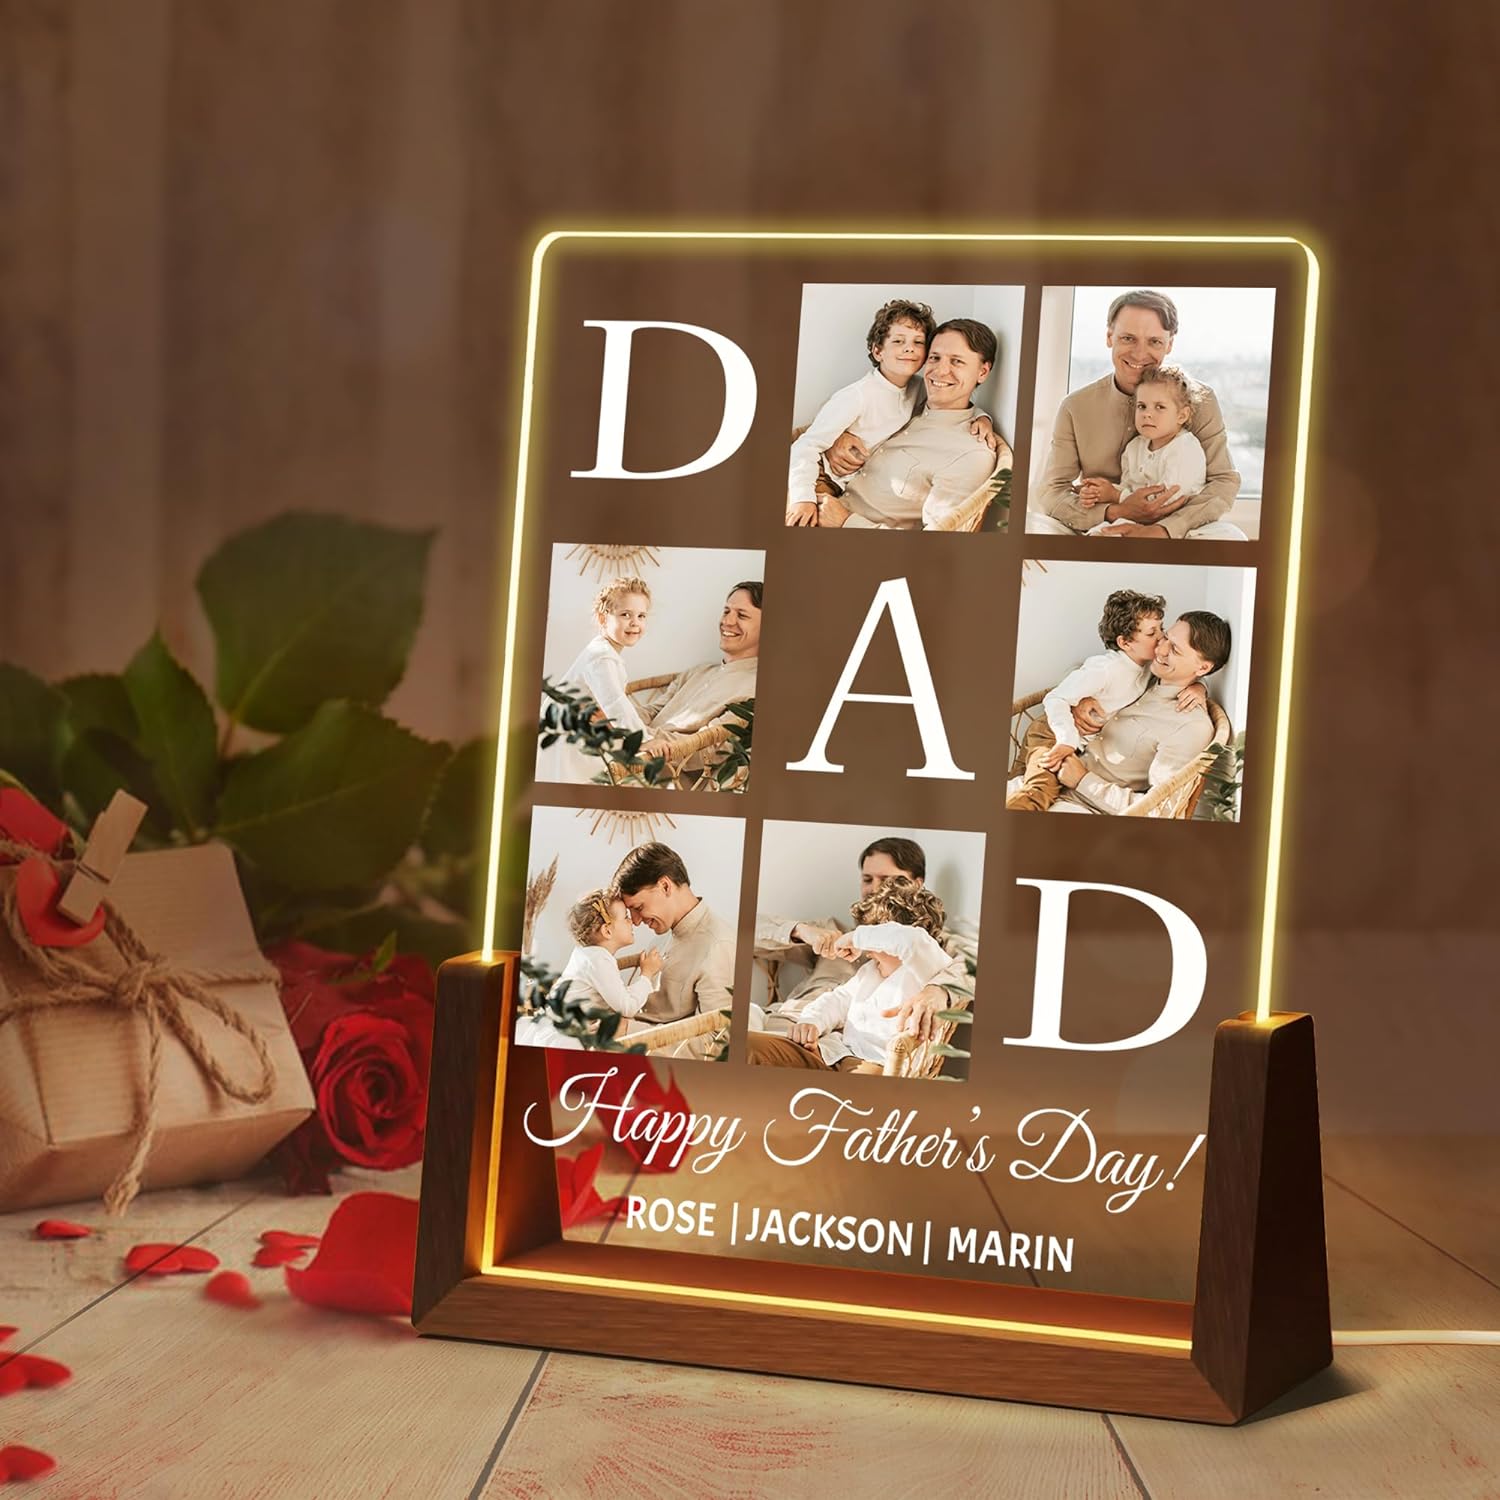 Personalized Acrylic Night Lights with Picture Text Gifts for Dad Custom Night Light